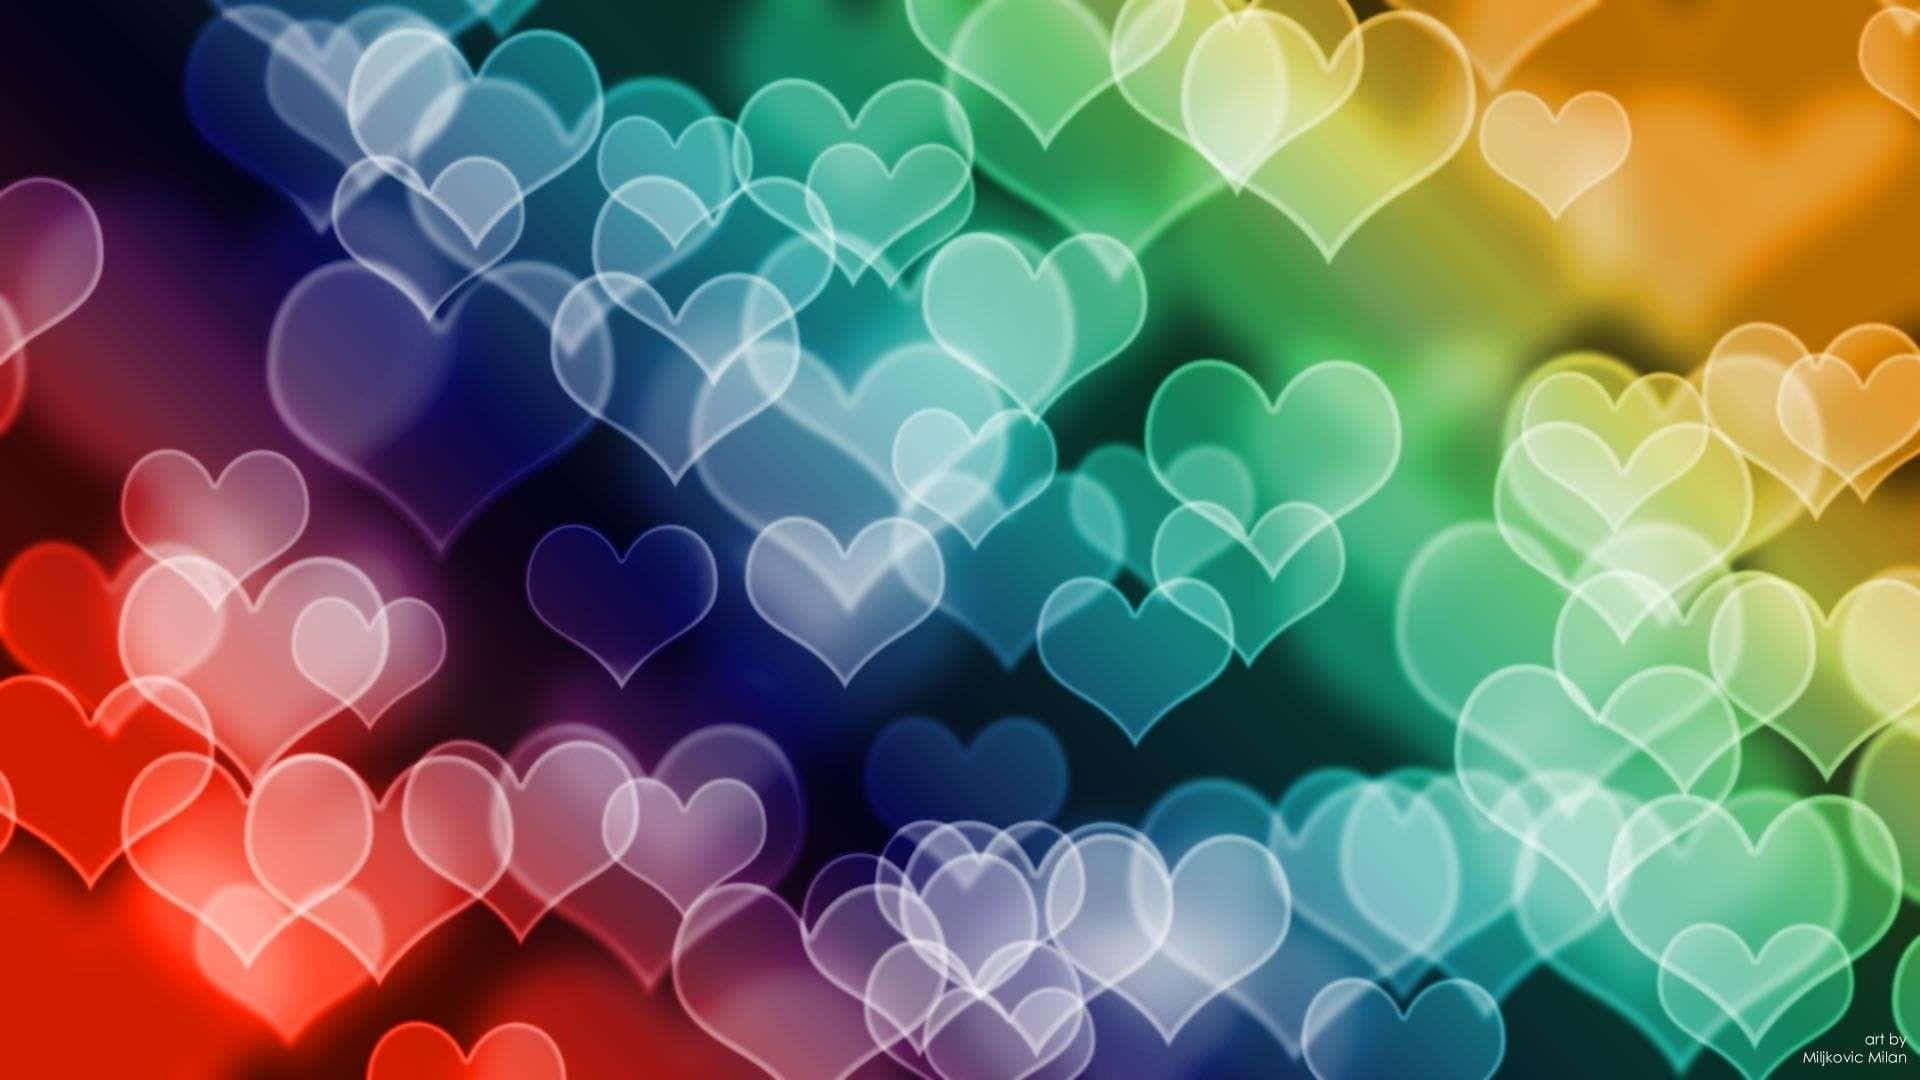 Take Pride In Love And Diversity With This Beautiful Rainbow Heart. Wallpaper